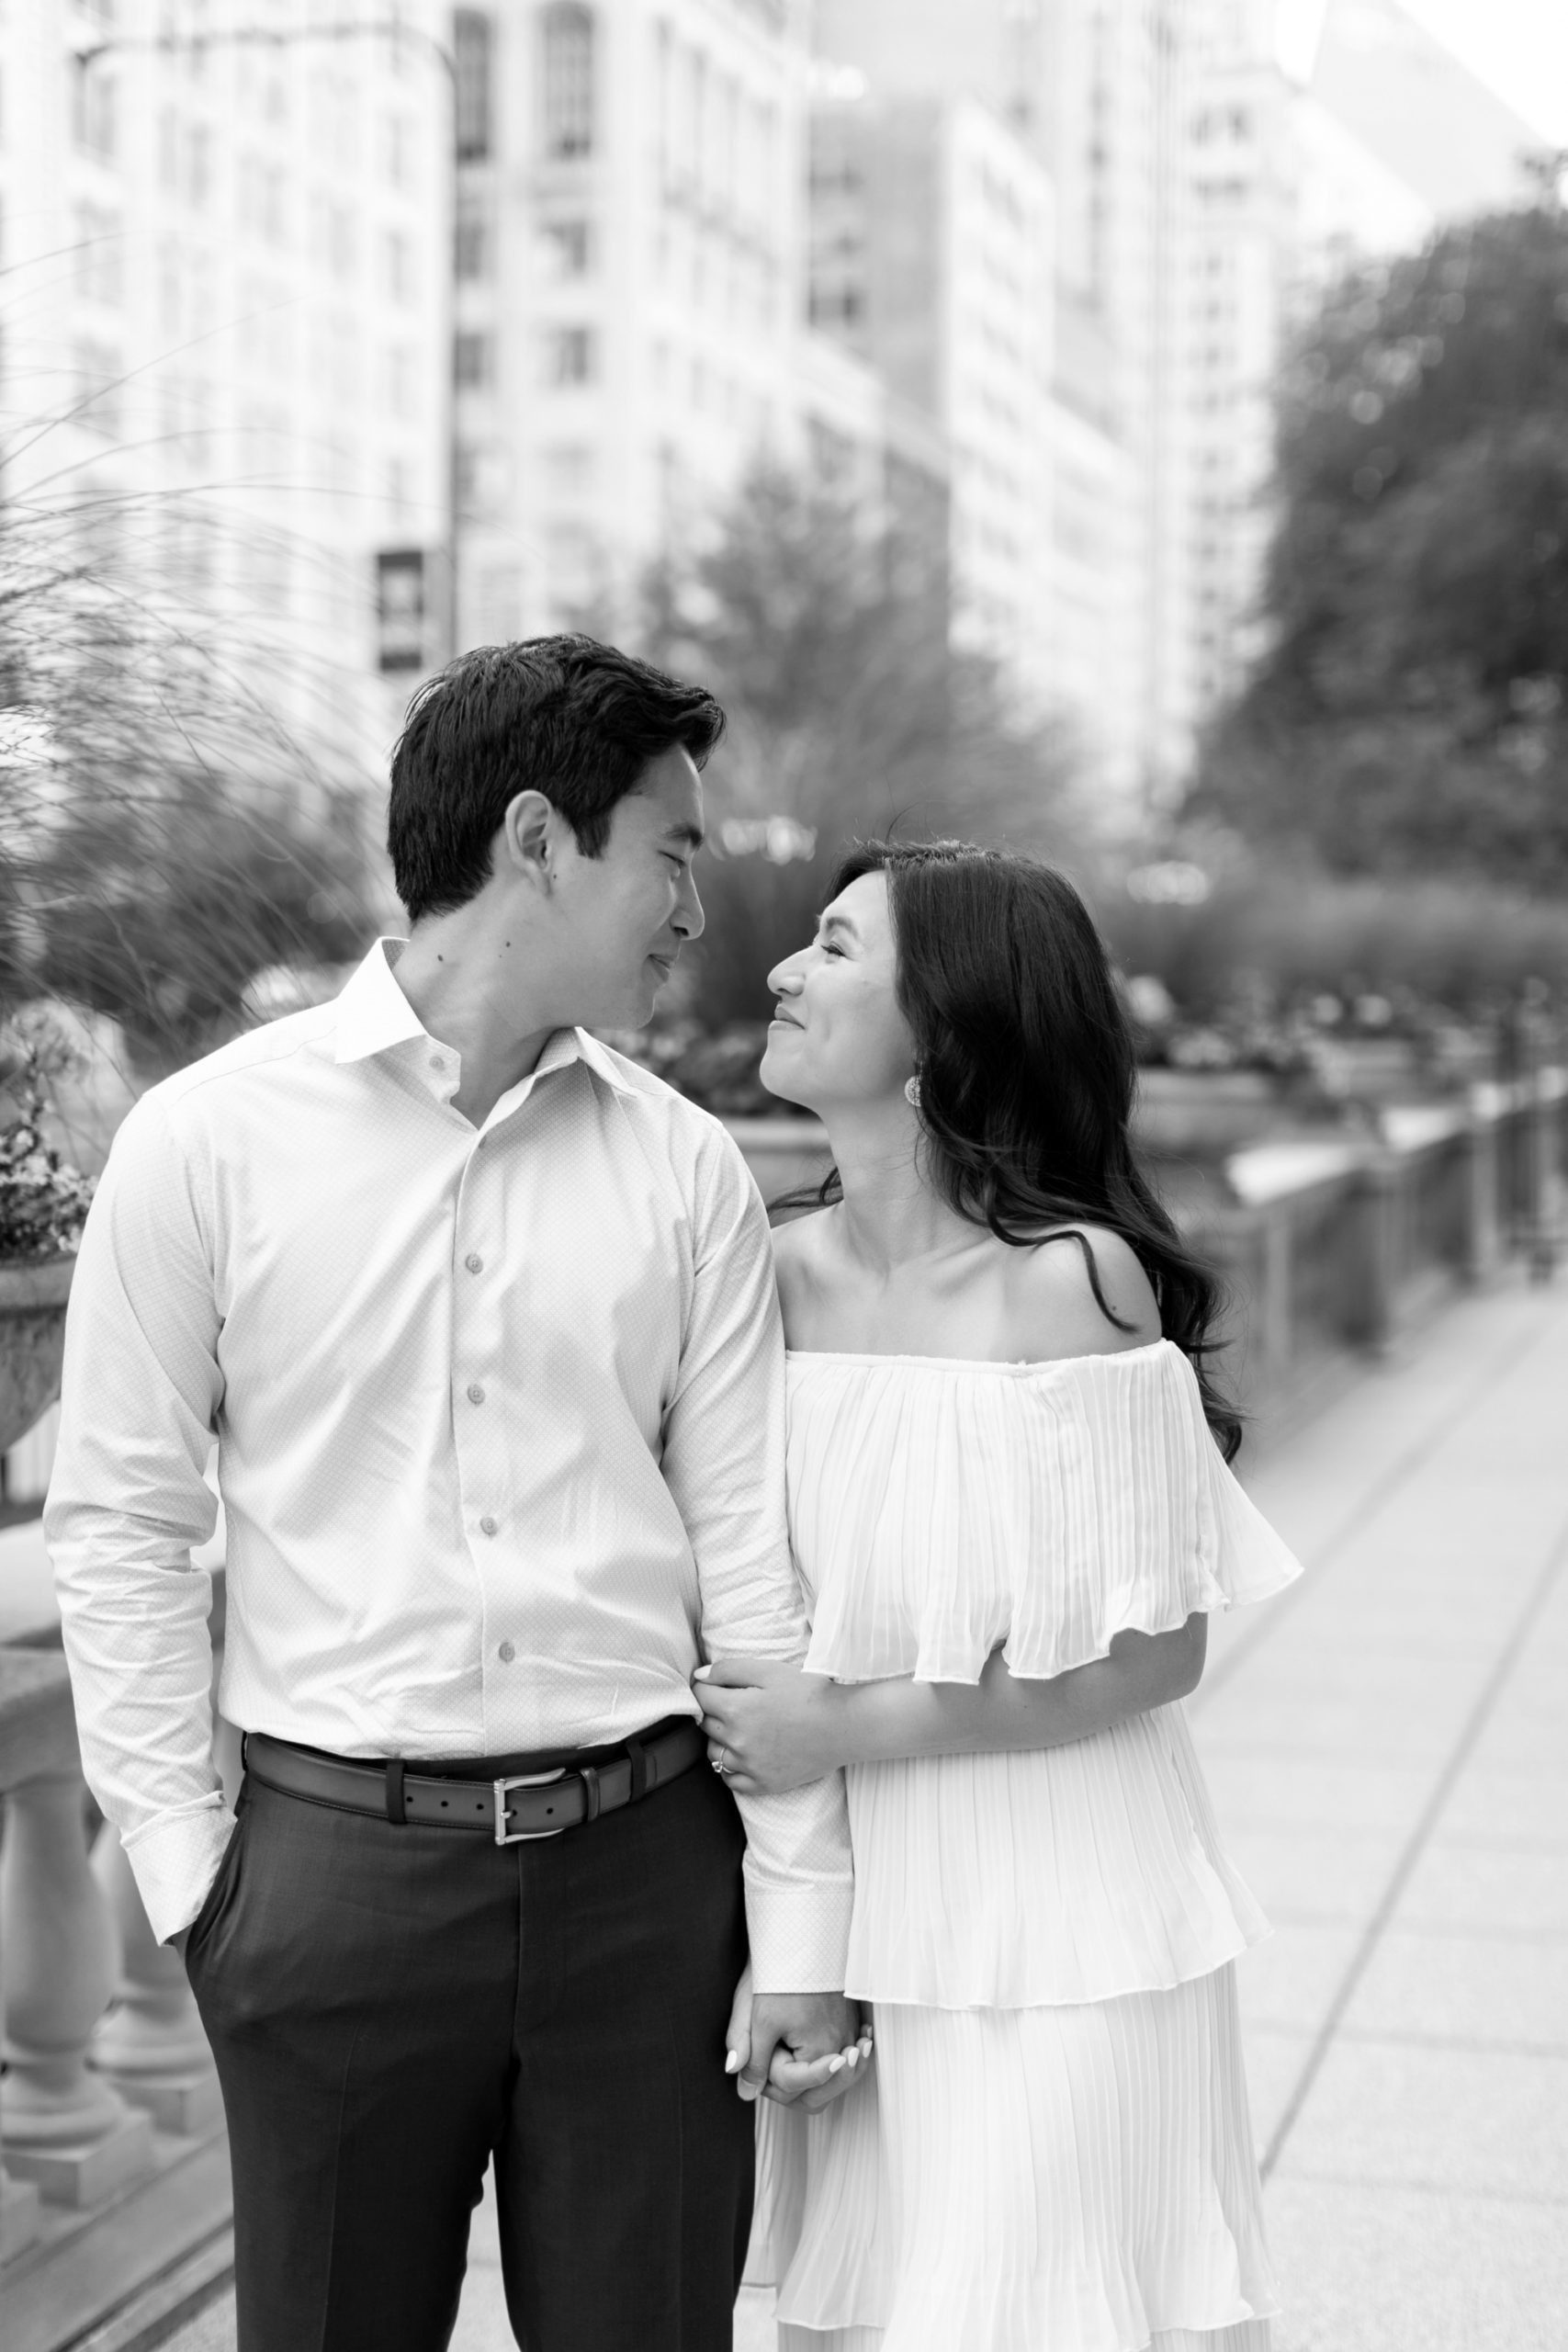 the couple smiled at each other during their summer engagement photos in Chicago